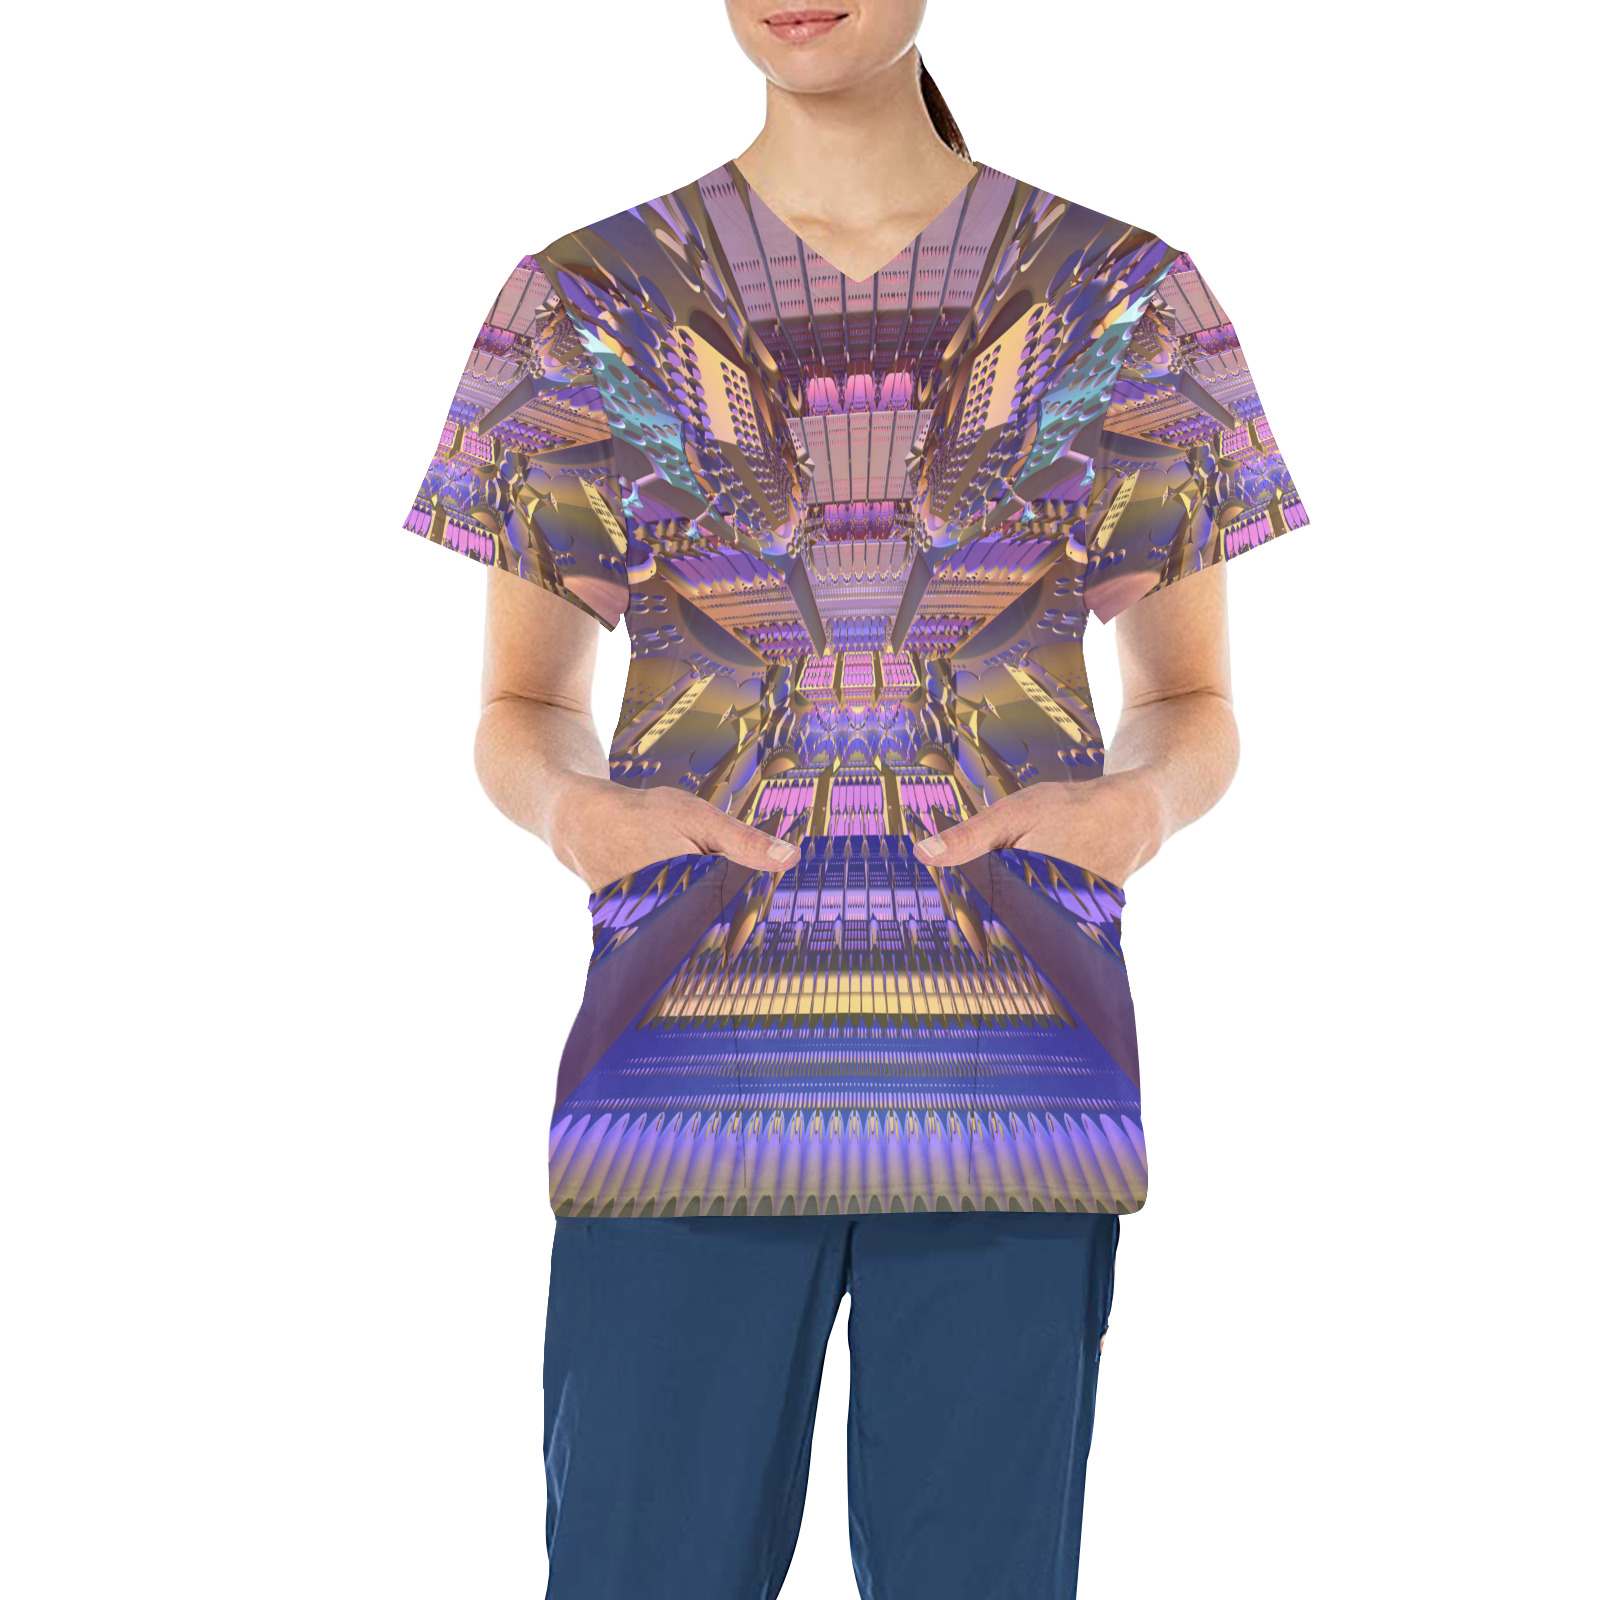 Pink and purple 3D Fractal All Over Print Scrub Top